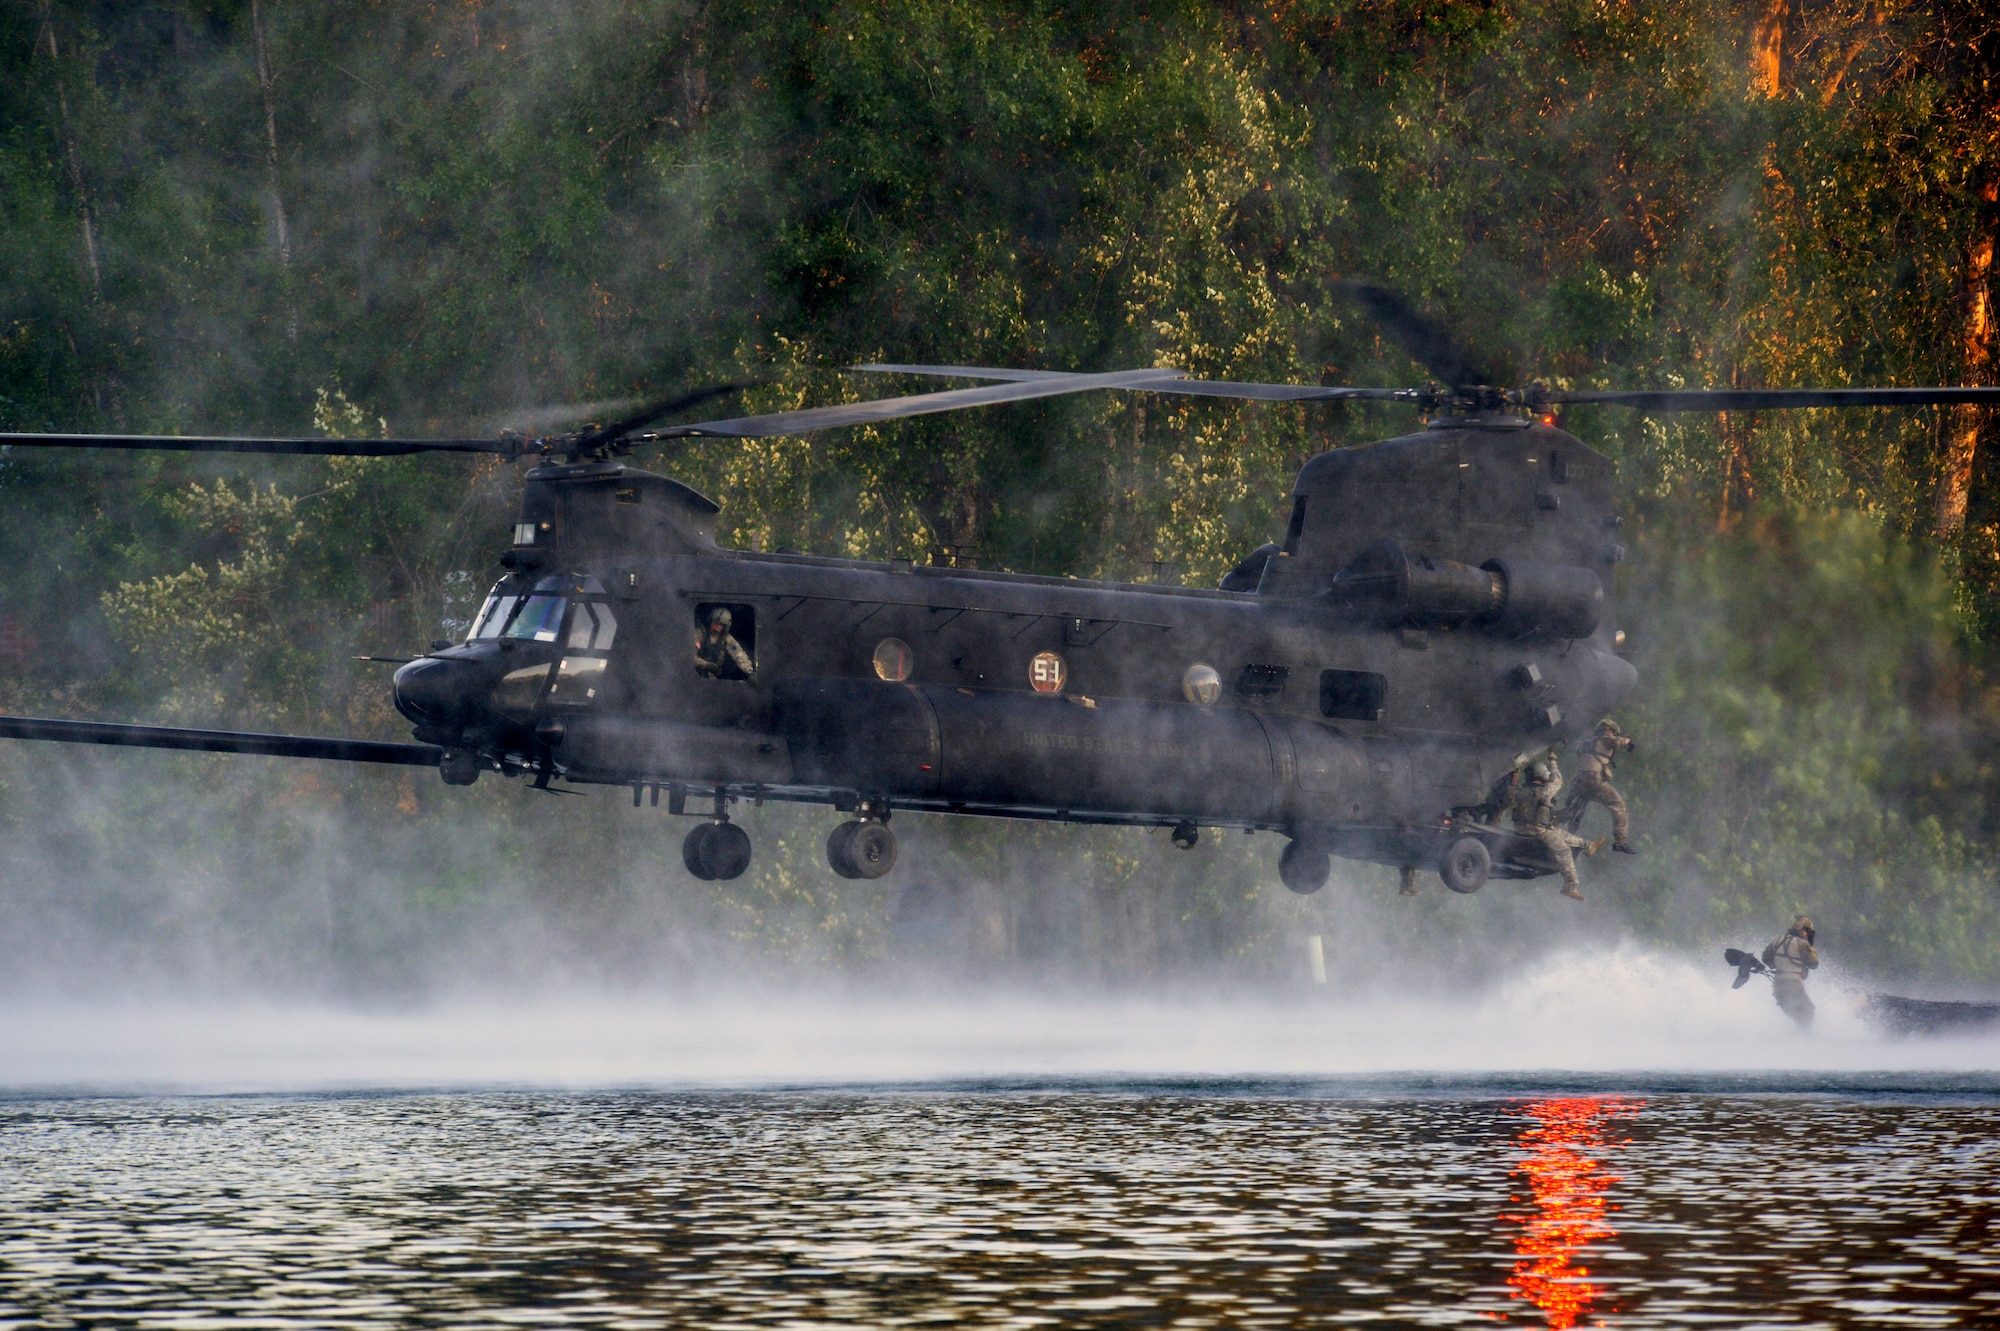 Airmen from the 22nd Special Tactics Squadron’s Red Team jump out of an MH-47 Chinook helicopter July 14, 2014, during helocast alternate insertion and extraction training with Soldiers from the 160th Special Operations Aviation Regiment at American Lake on Joint Base Lewis-McChord, Wash. This exercise proved that Soldiers and Airmen from Joint Base Lewis-McChord can train together, fight together and run a base together. (U.S. Air Force photo/Staff Sgt.Russ Jackson)